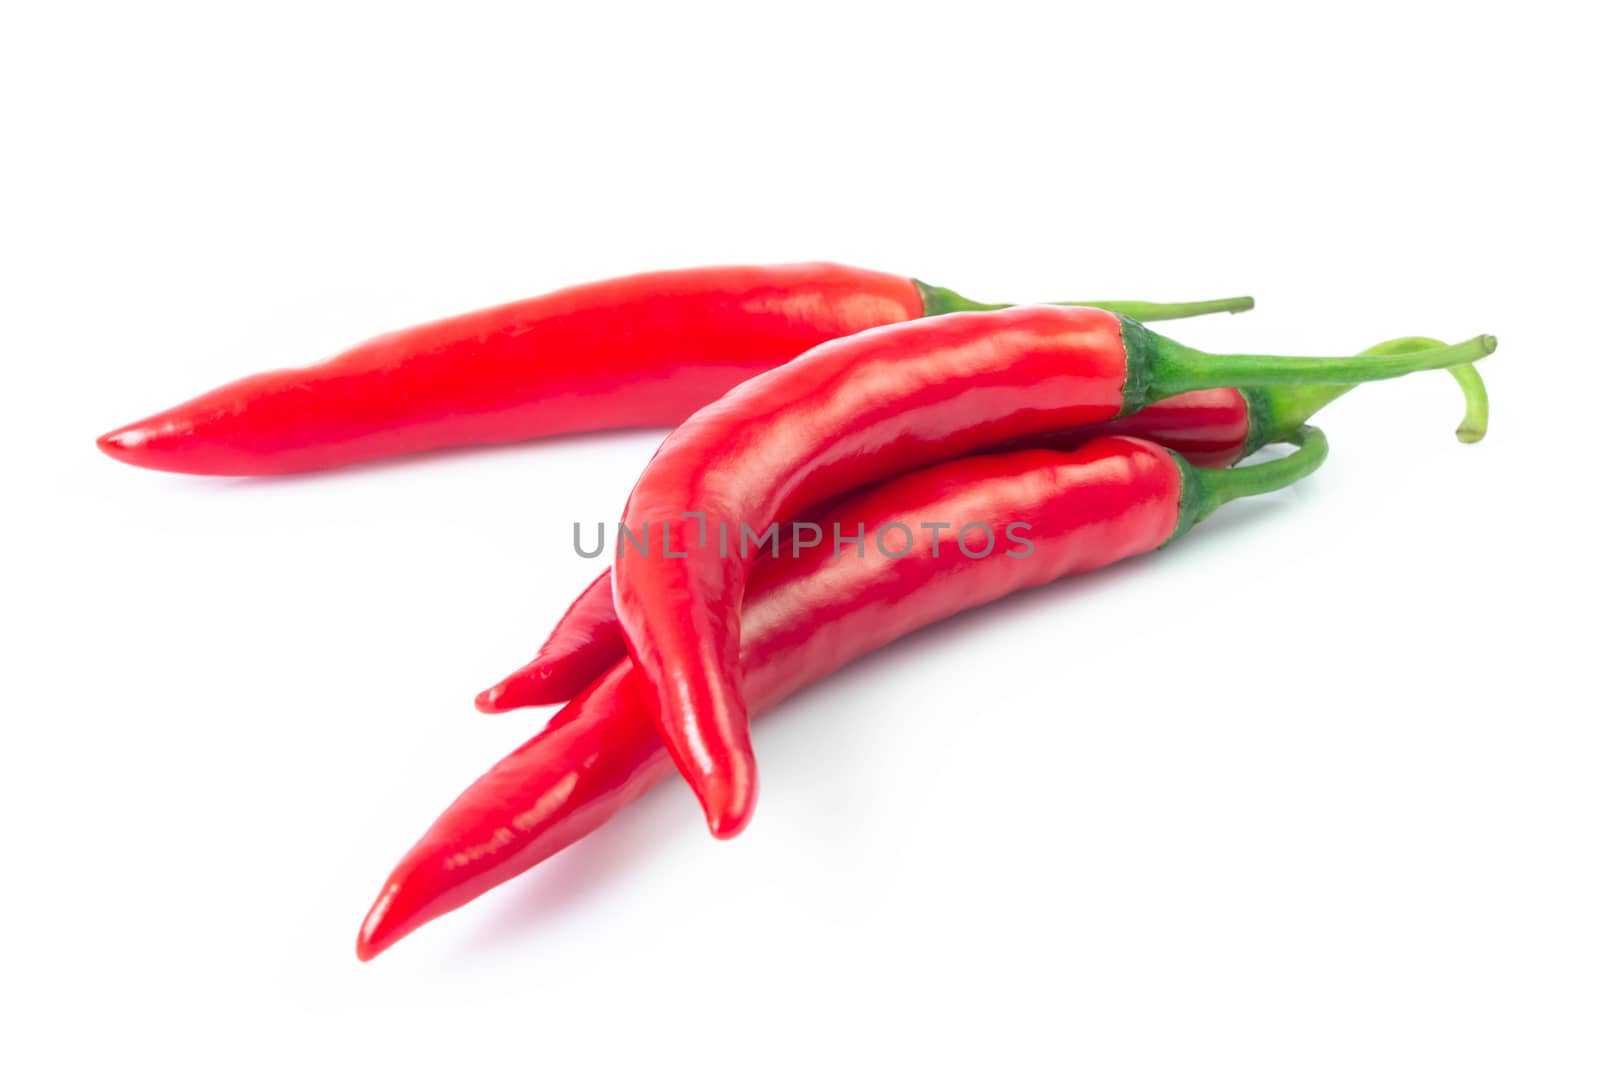 Closeup red chili pepper on white background, raw food ingredien by pt.pongsak@gmail.com